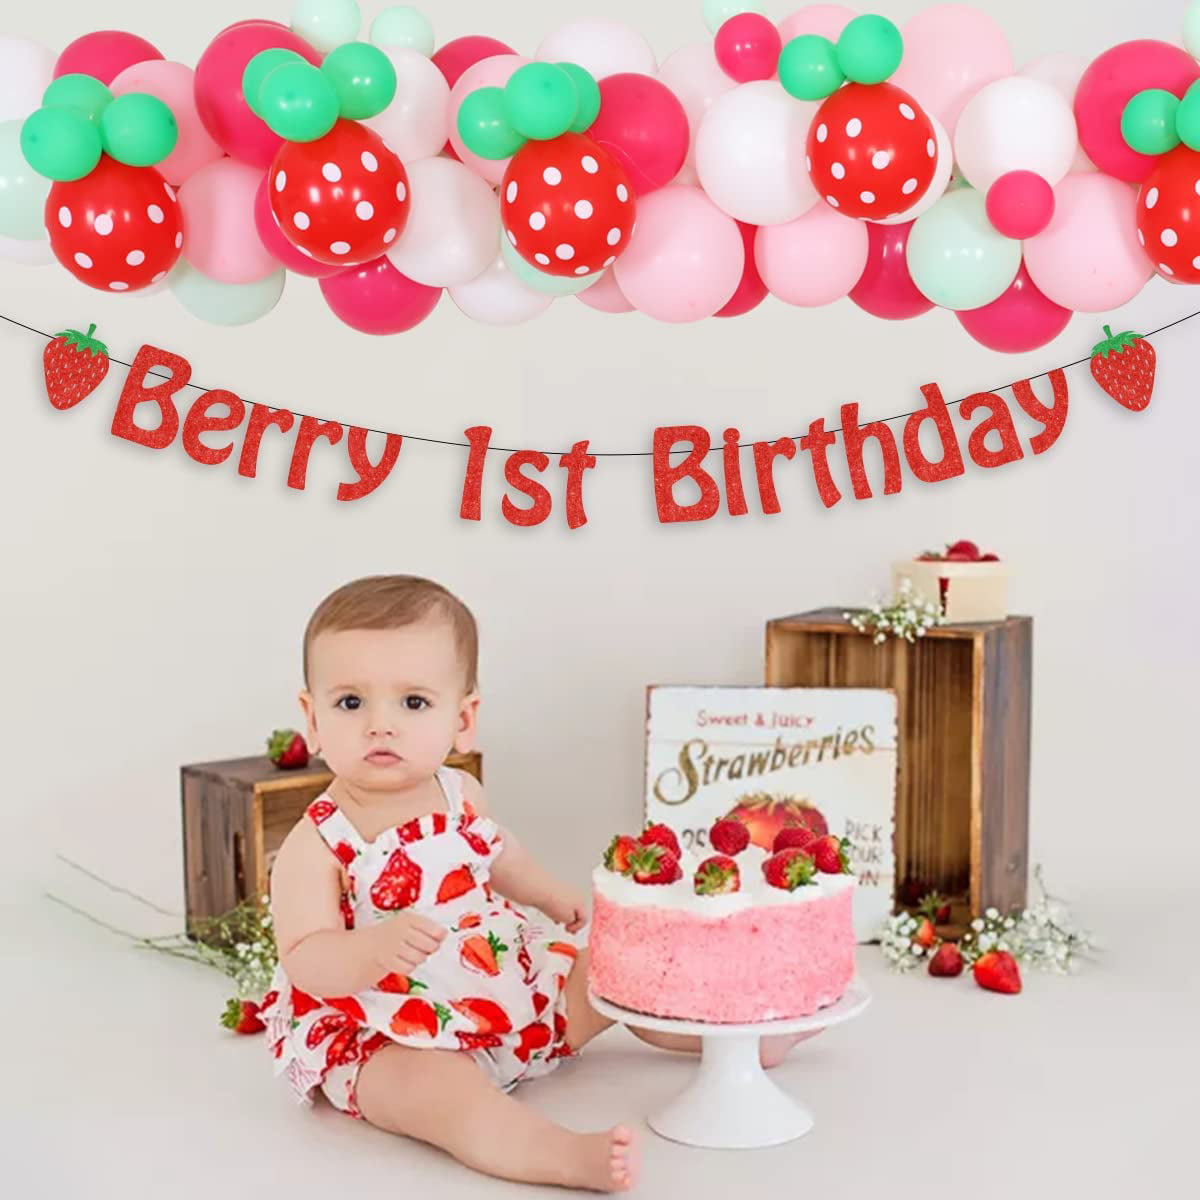 Strawberry 1st Birthday Decorations - Berry First Birthday Banner, Strawberry Balloon Garland Kit, Foil Balloons, Summer Fruit Strawberry Sweet One Birthday Party Decorations for Girls - Walmart.com